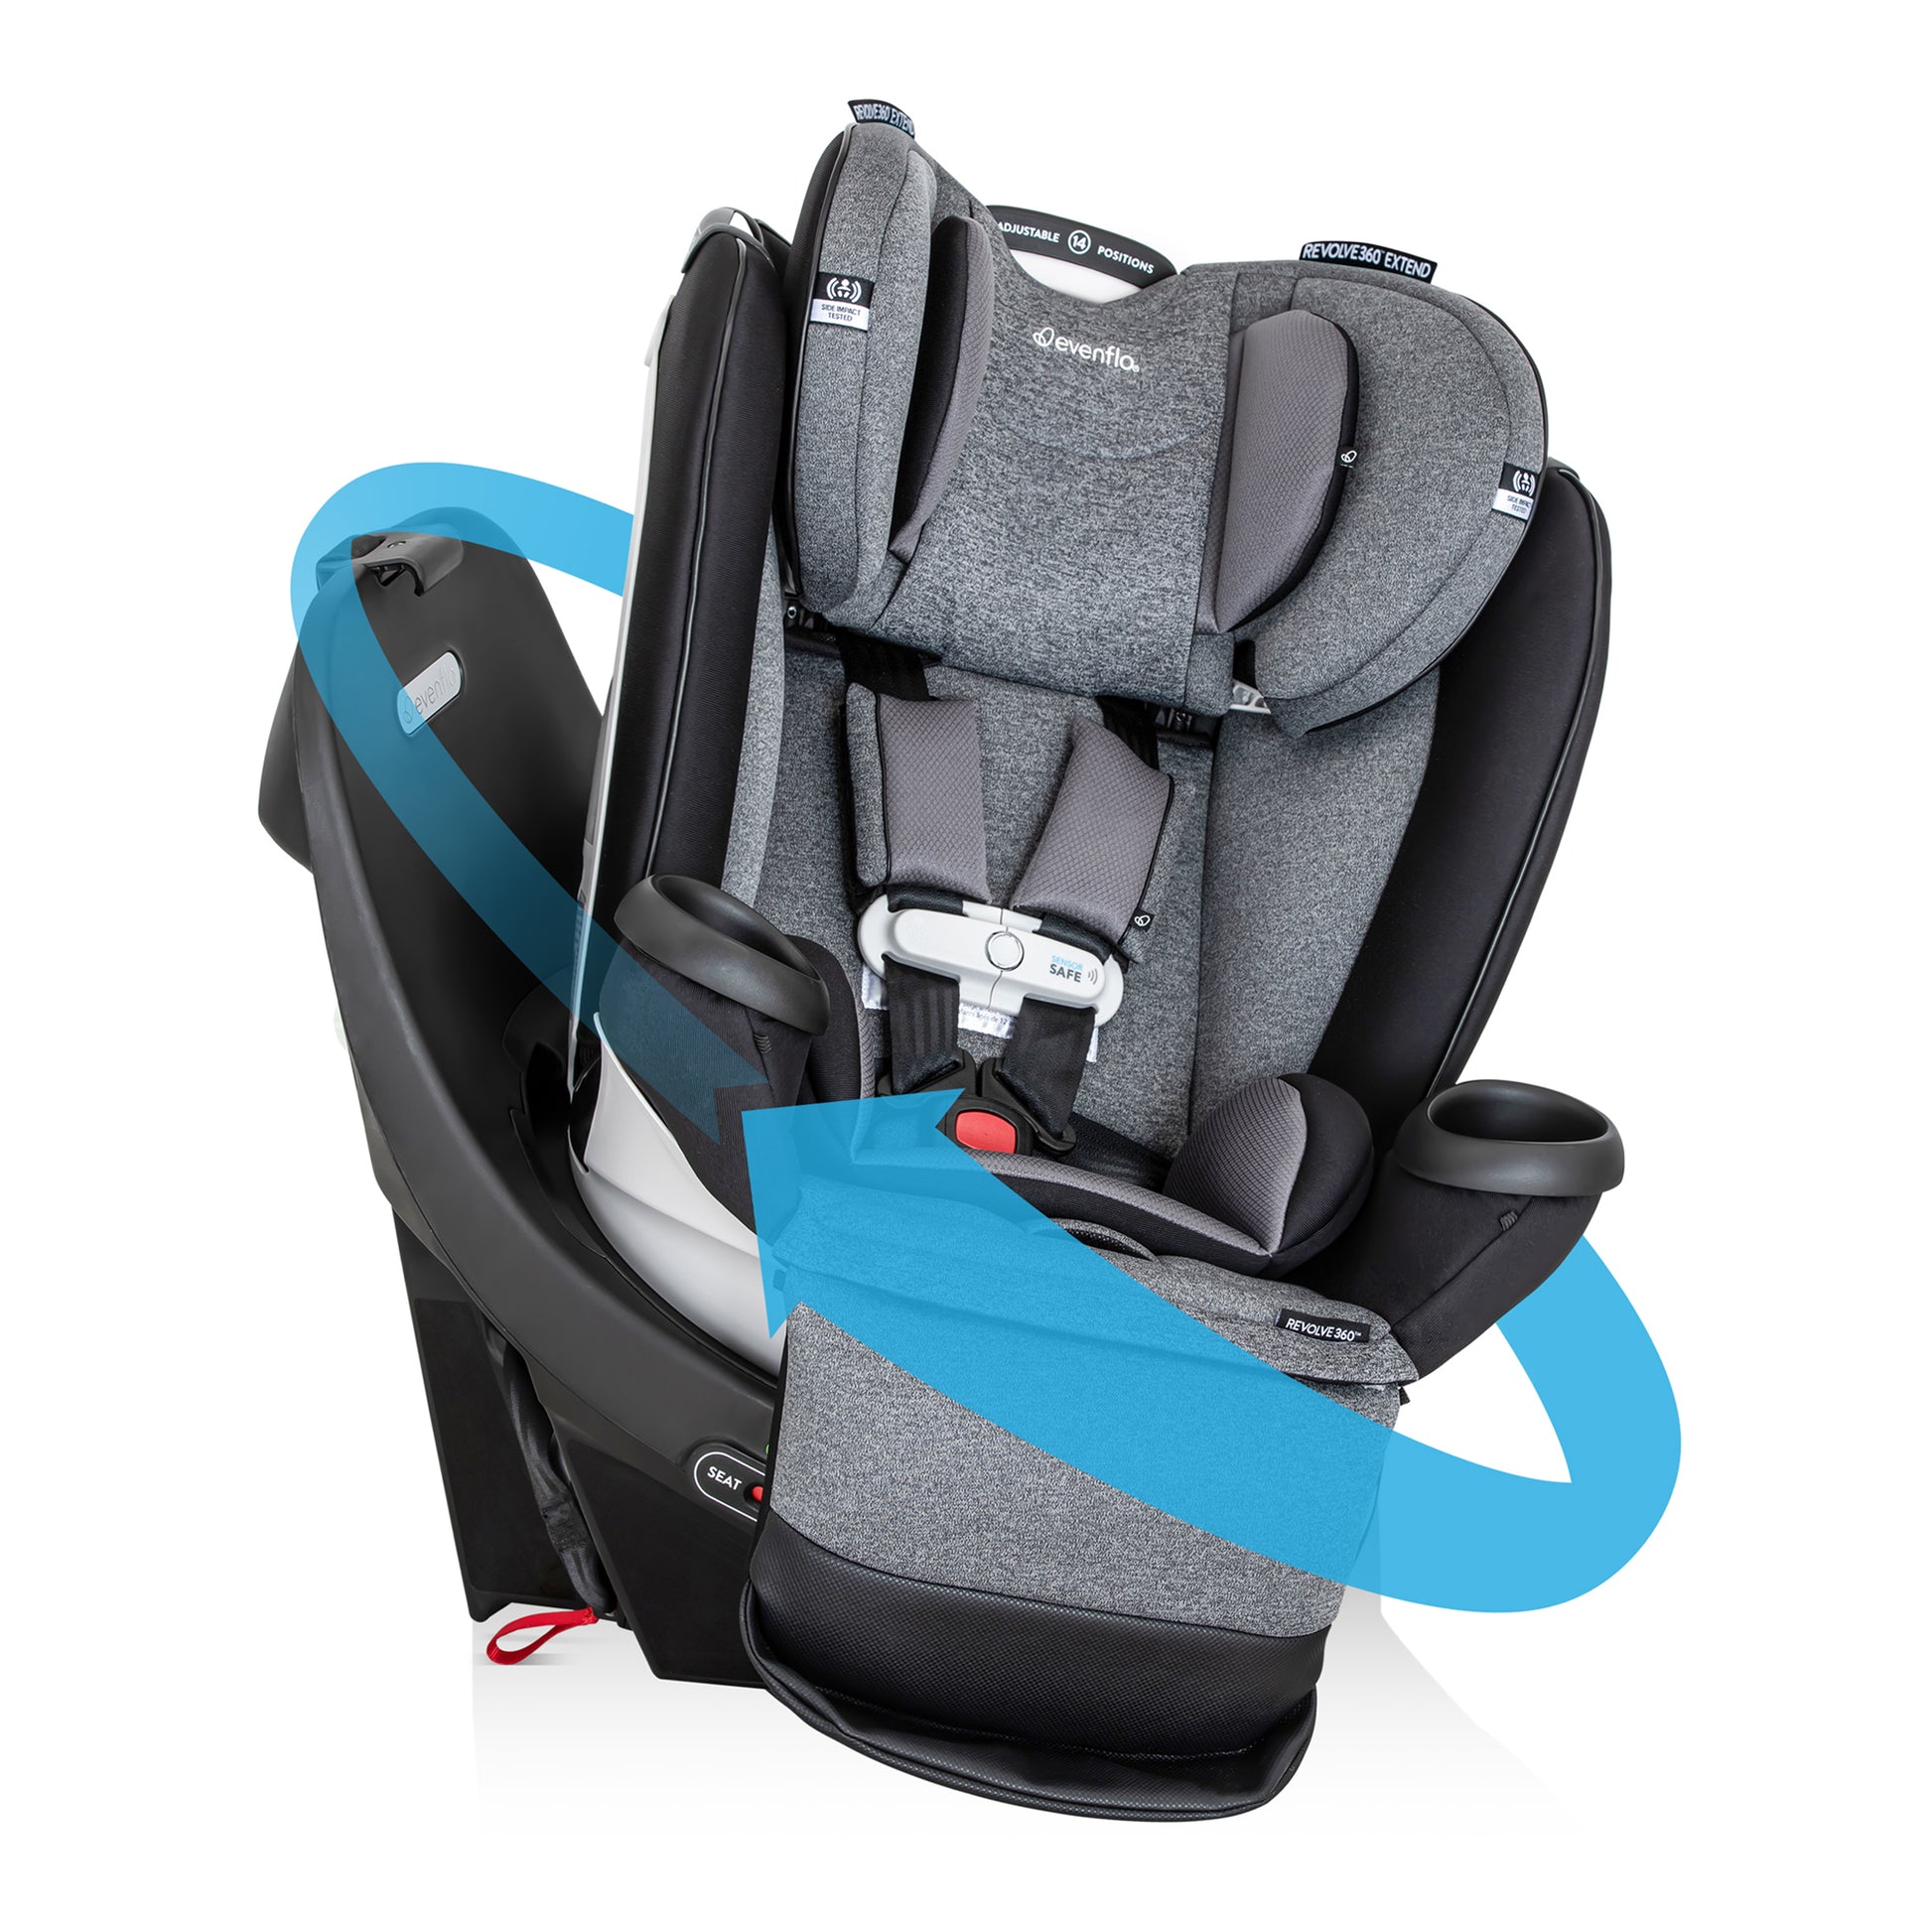 Everything You Need to Know About Car Seat Safety in Canada